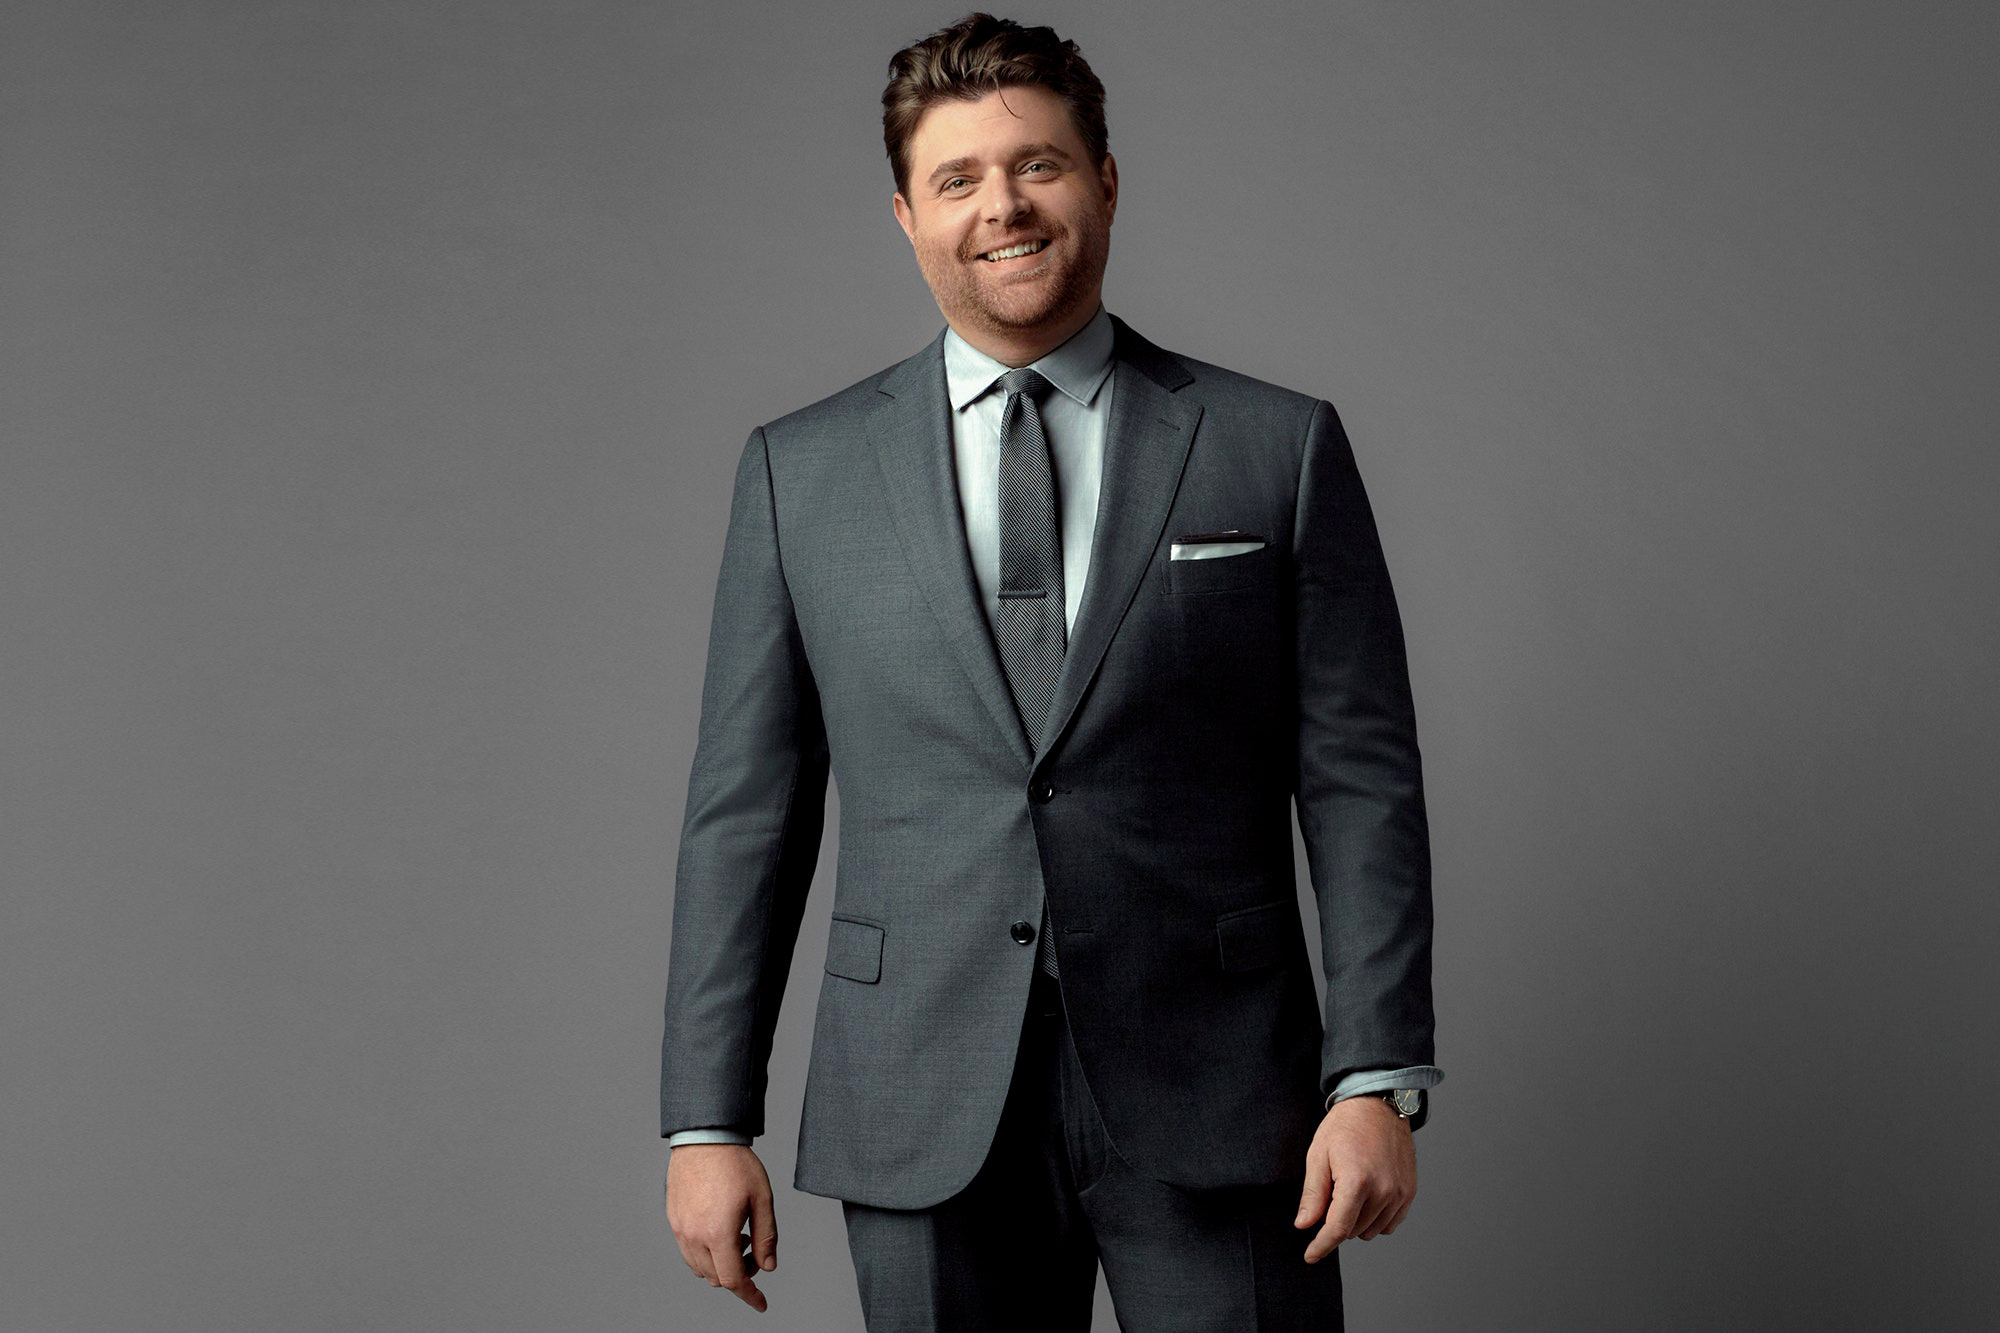 Mens Plus Size Suits, Big and Tall Suits